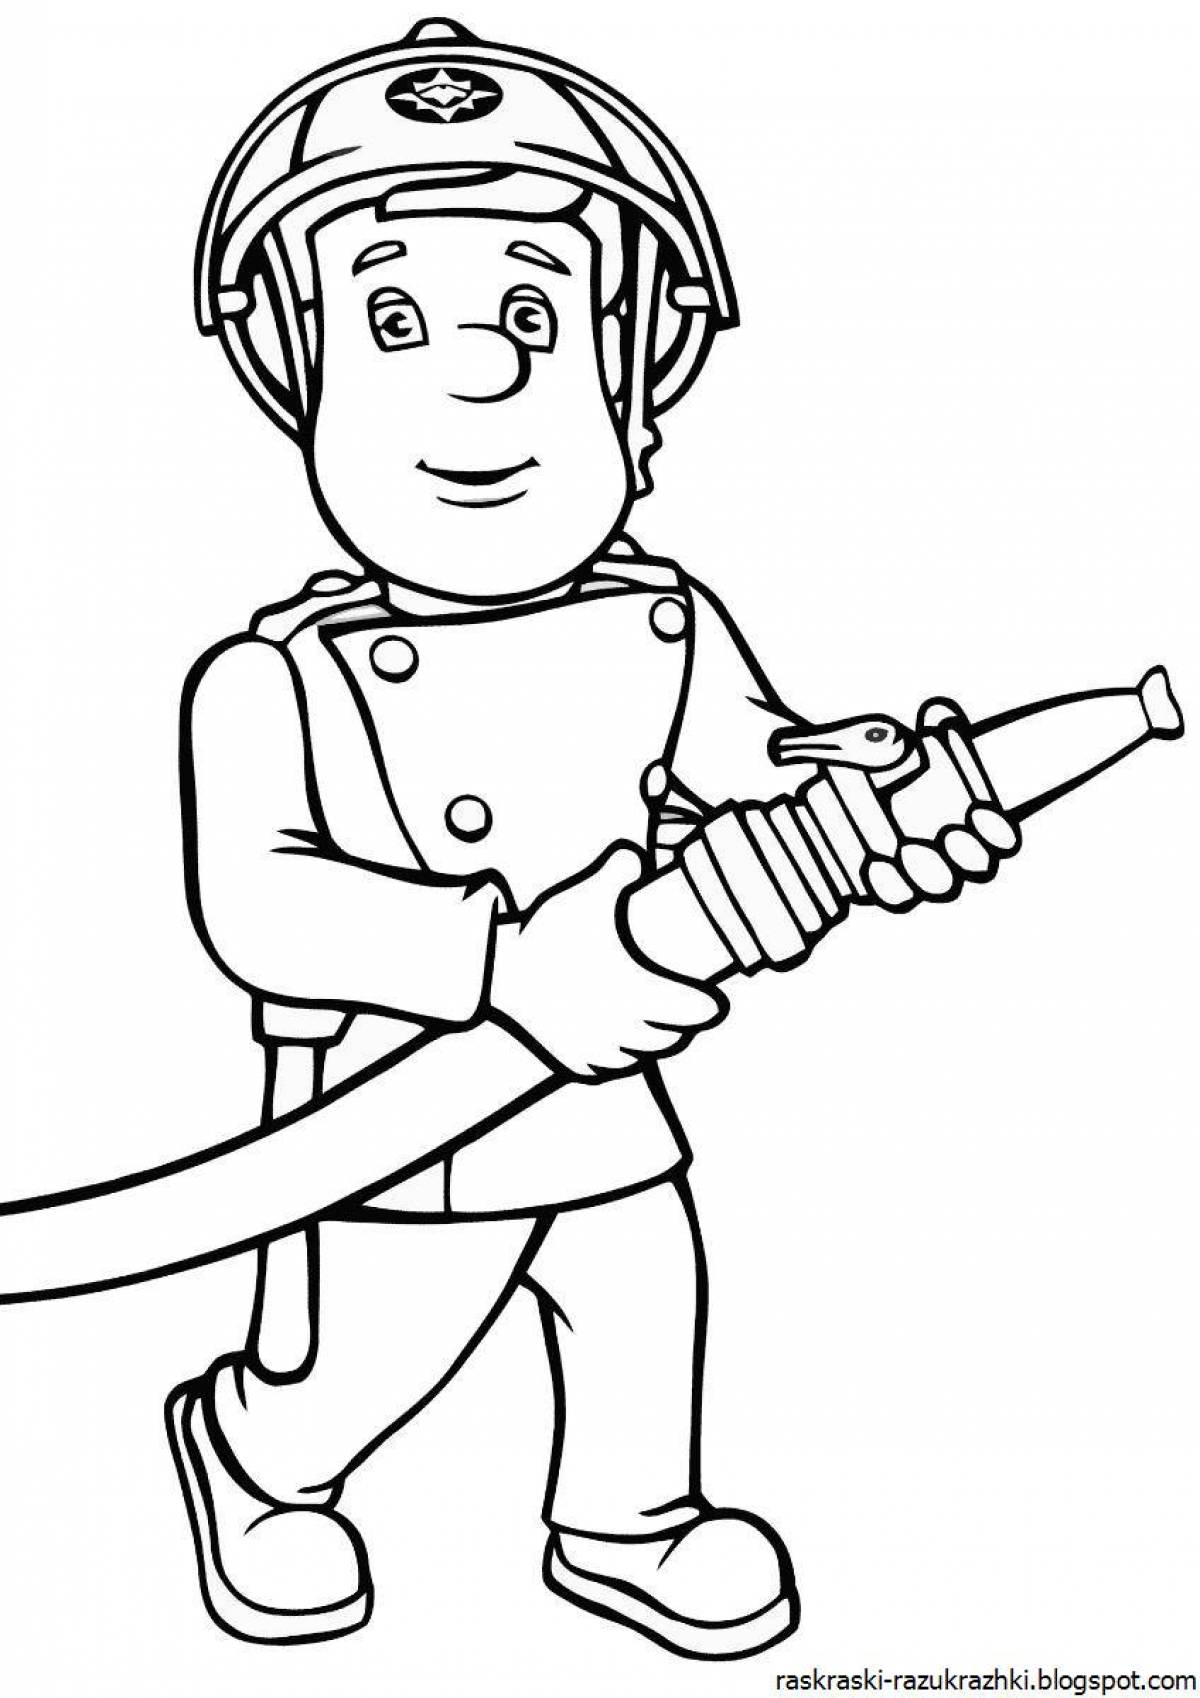 Amazing fireman coloring book for kids